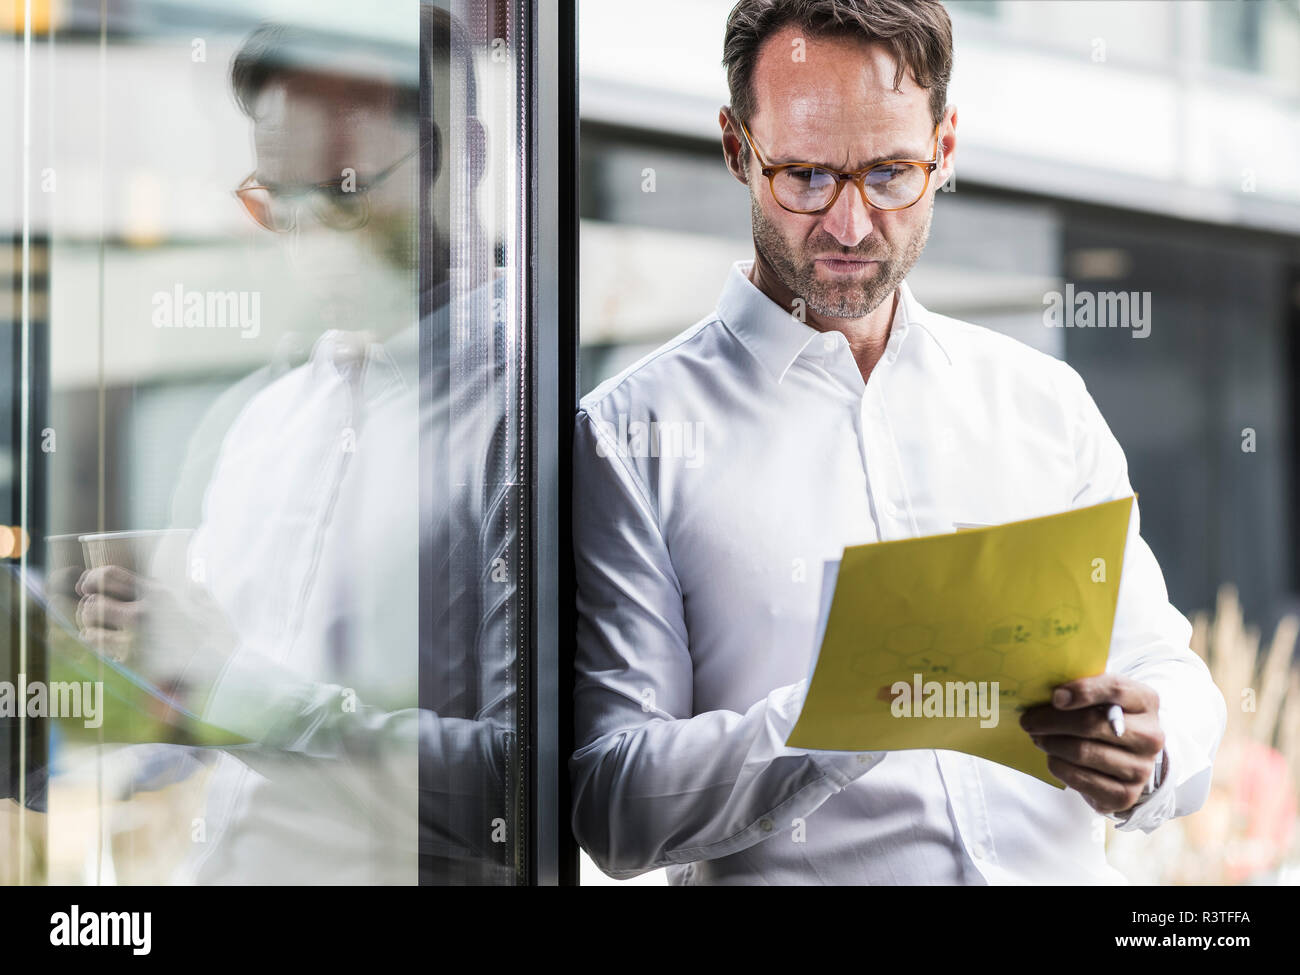 Businessman checking papers Stock Photo